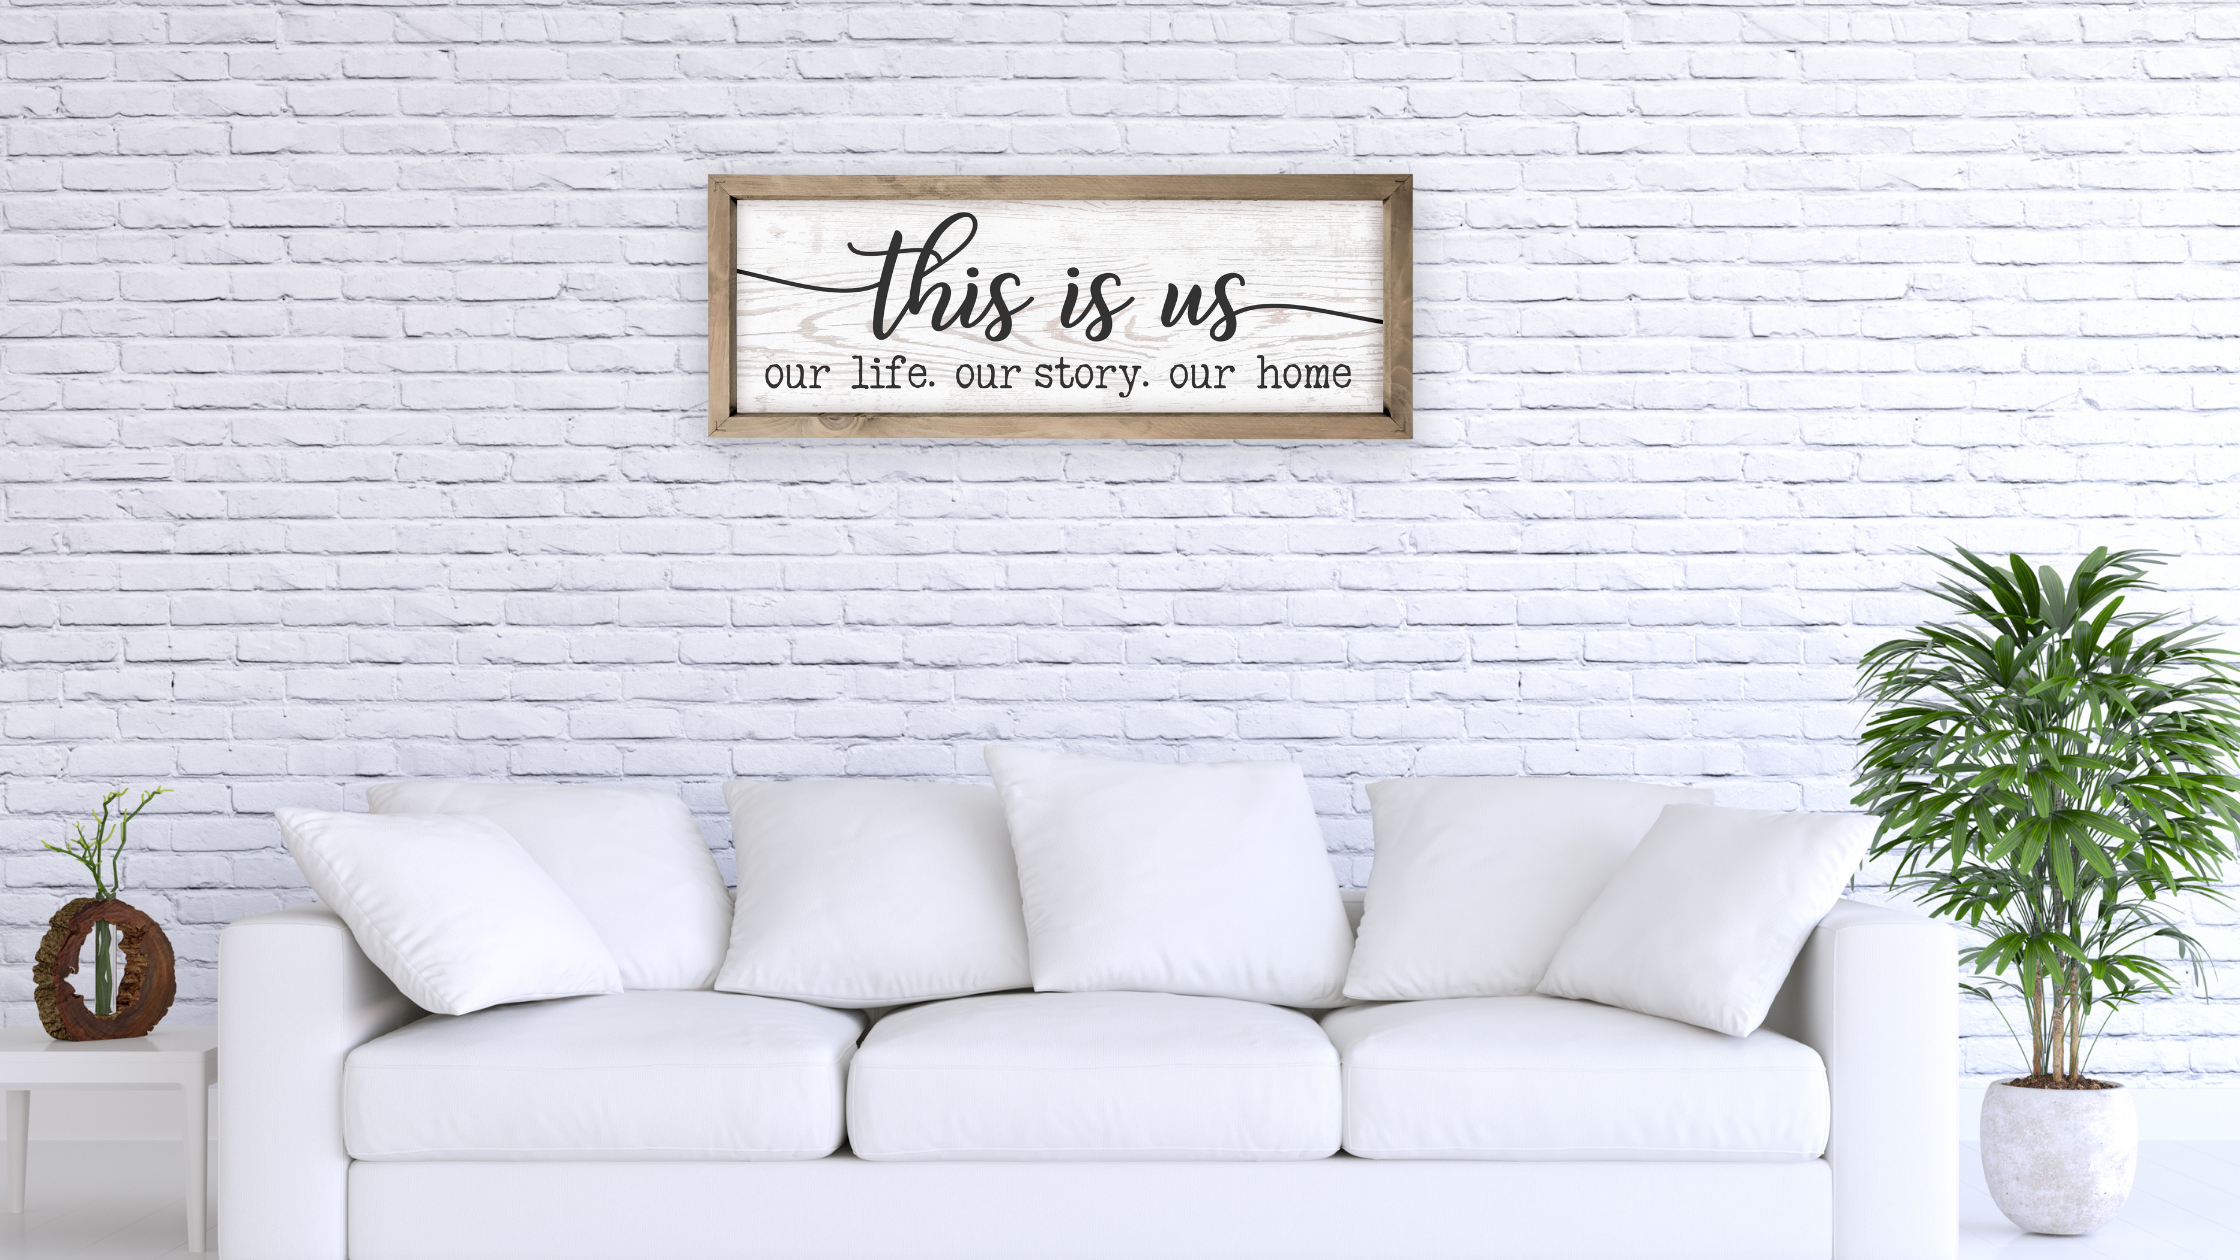 This is Us wood wall sign